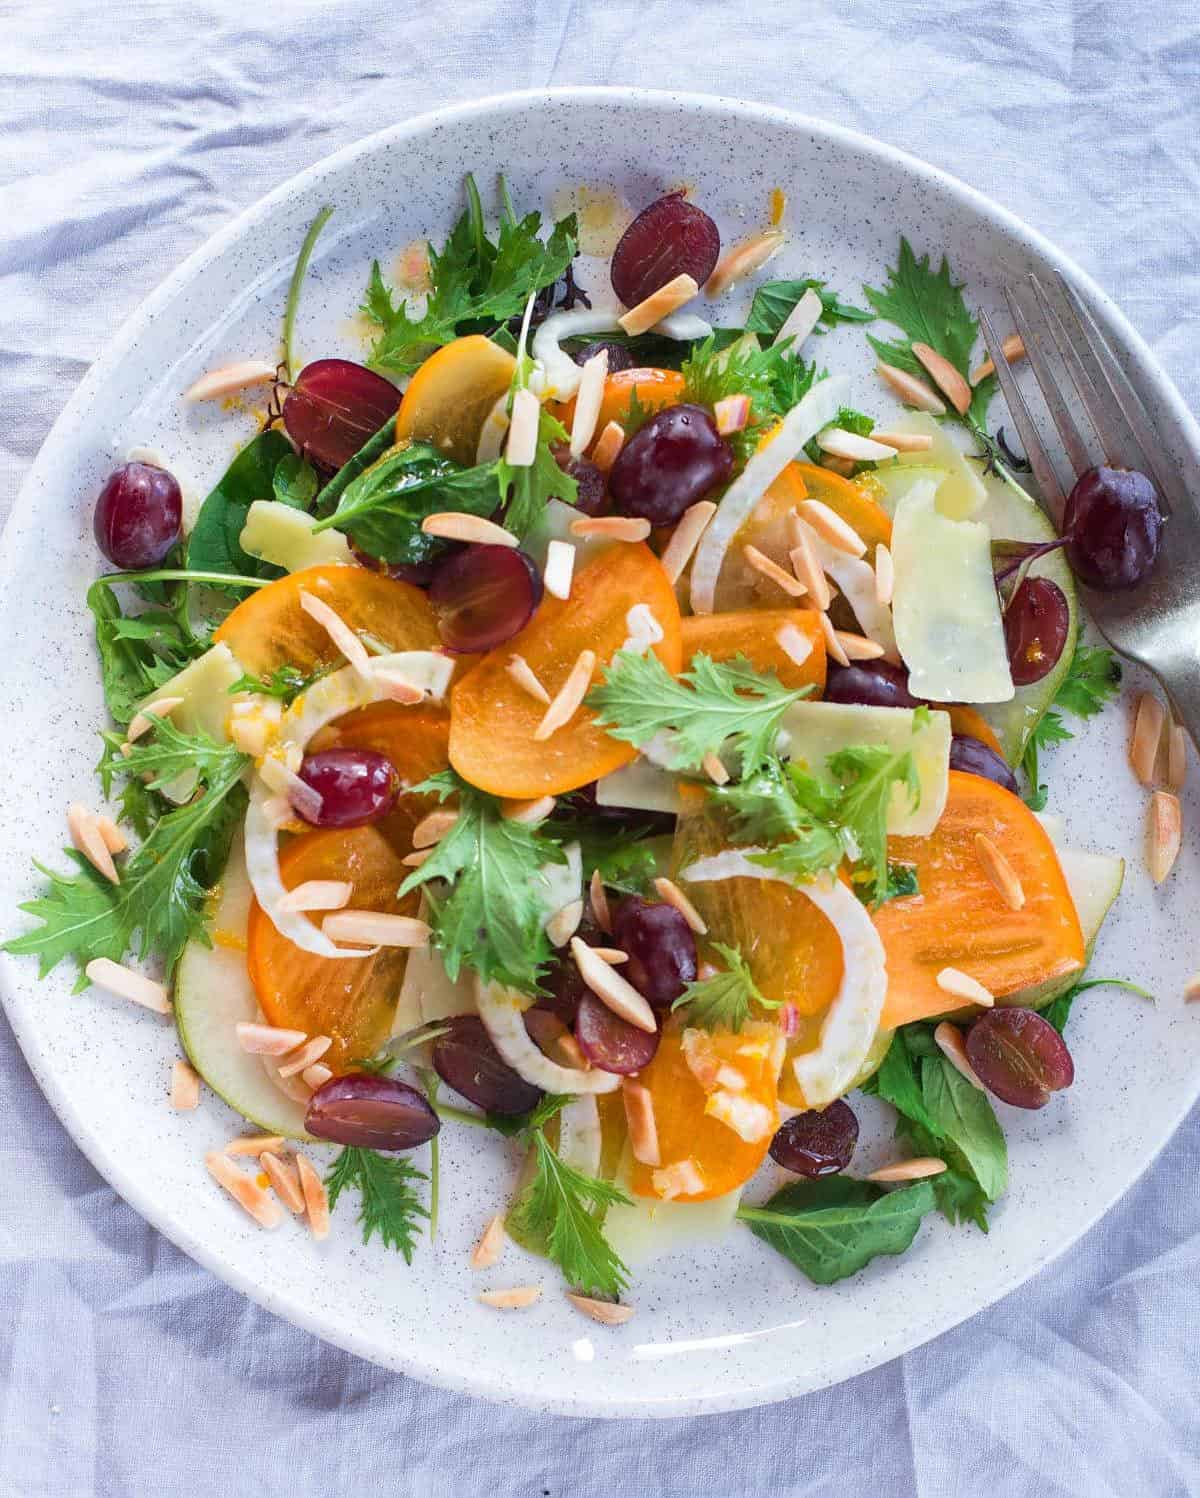  This salad is as photogenic as it is delicious!